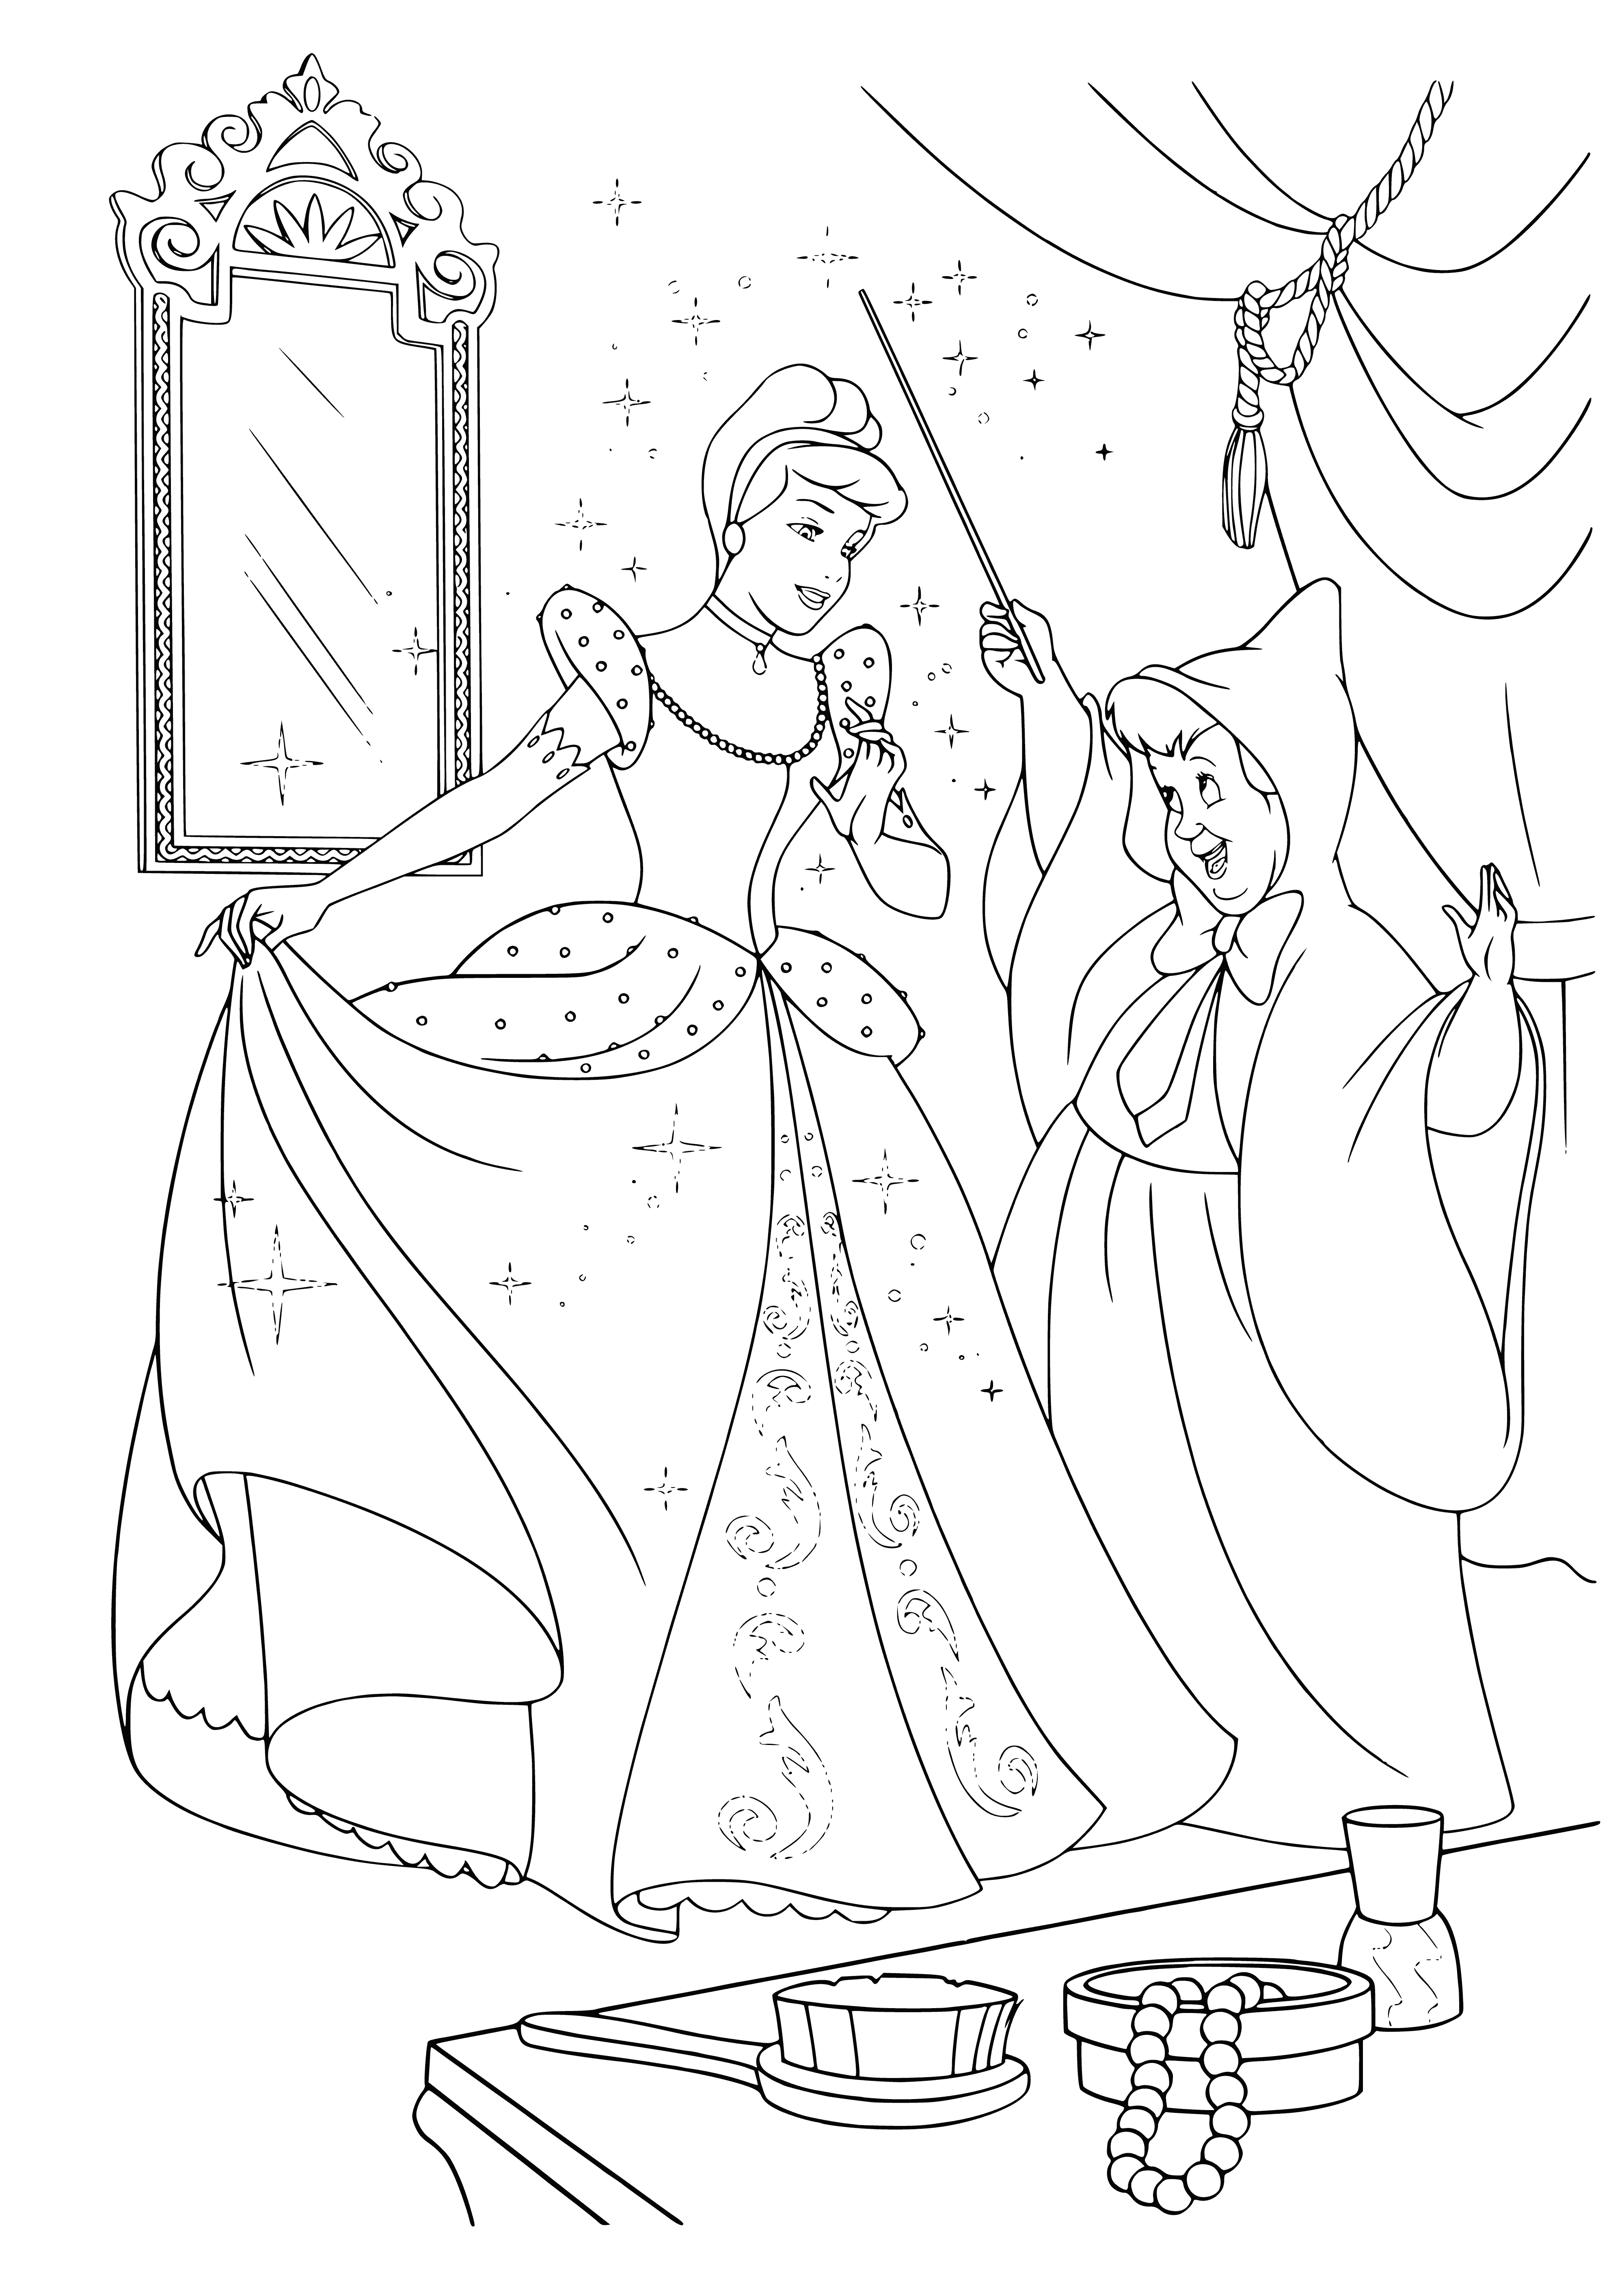 Cinderella's new outfit coloring page